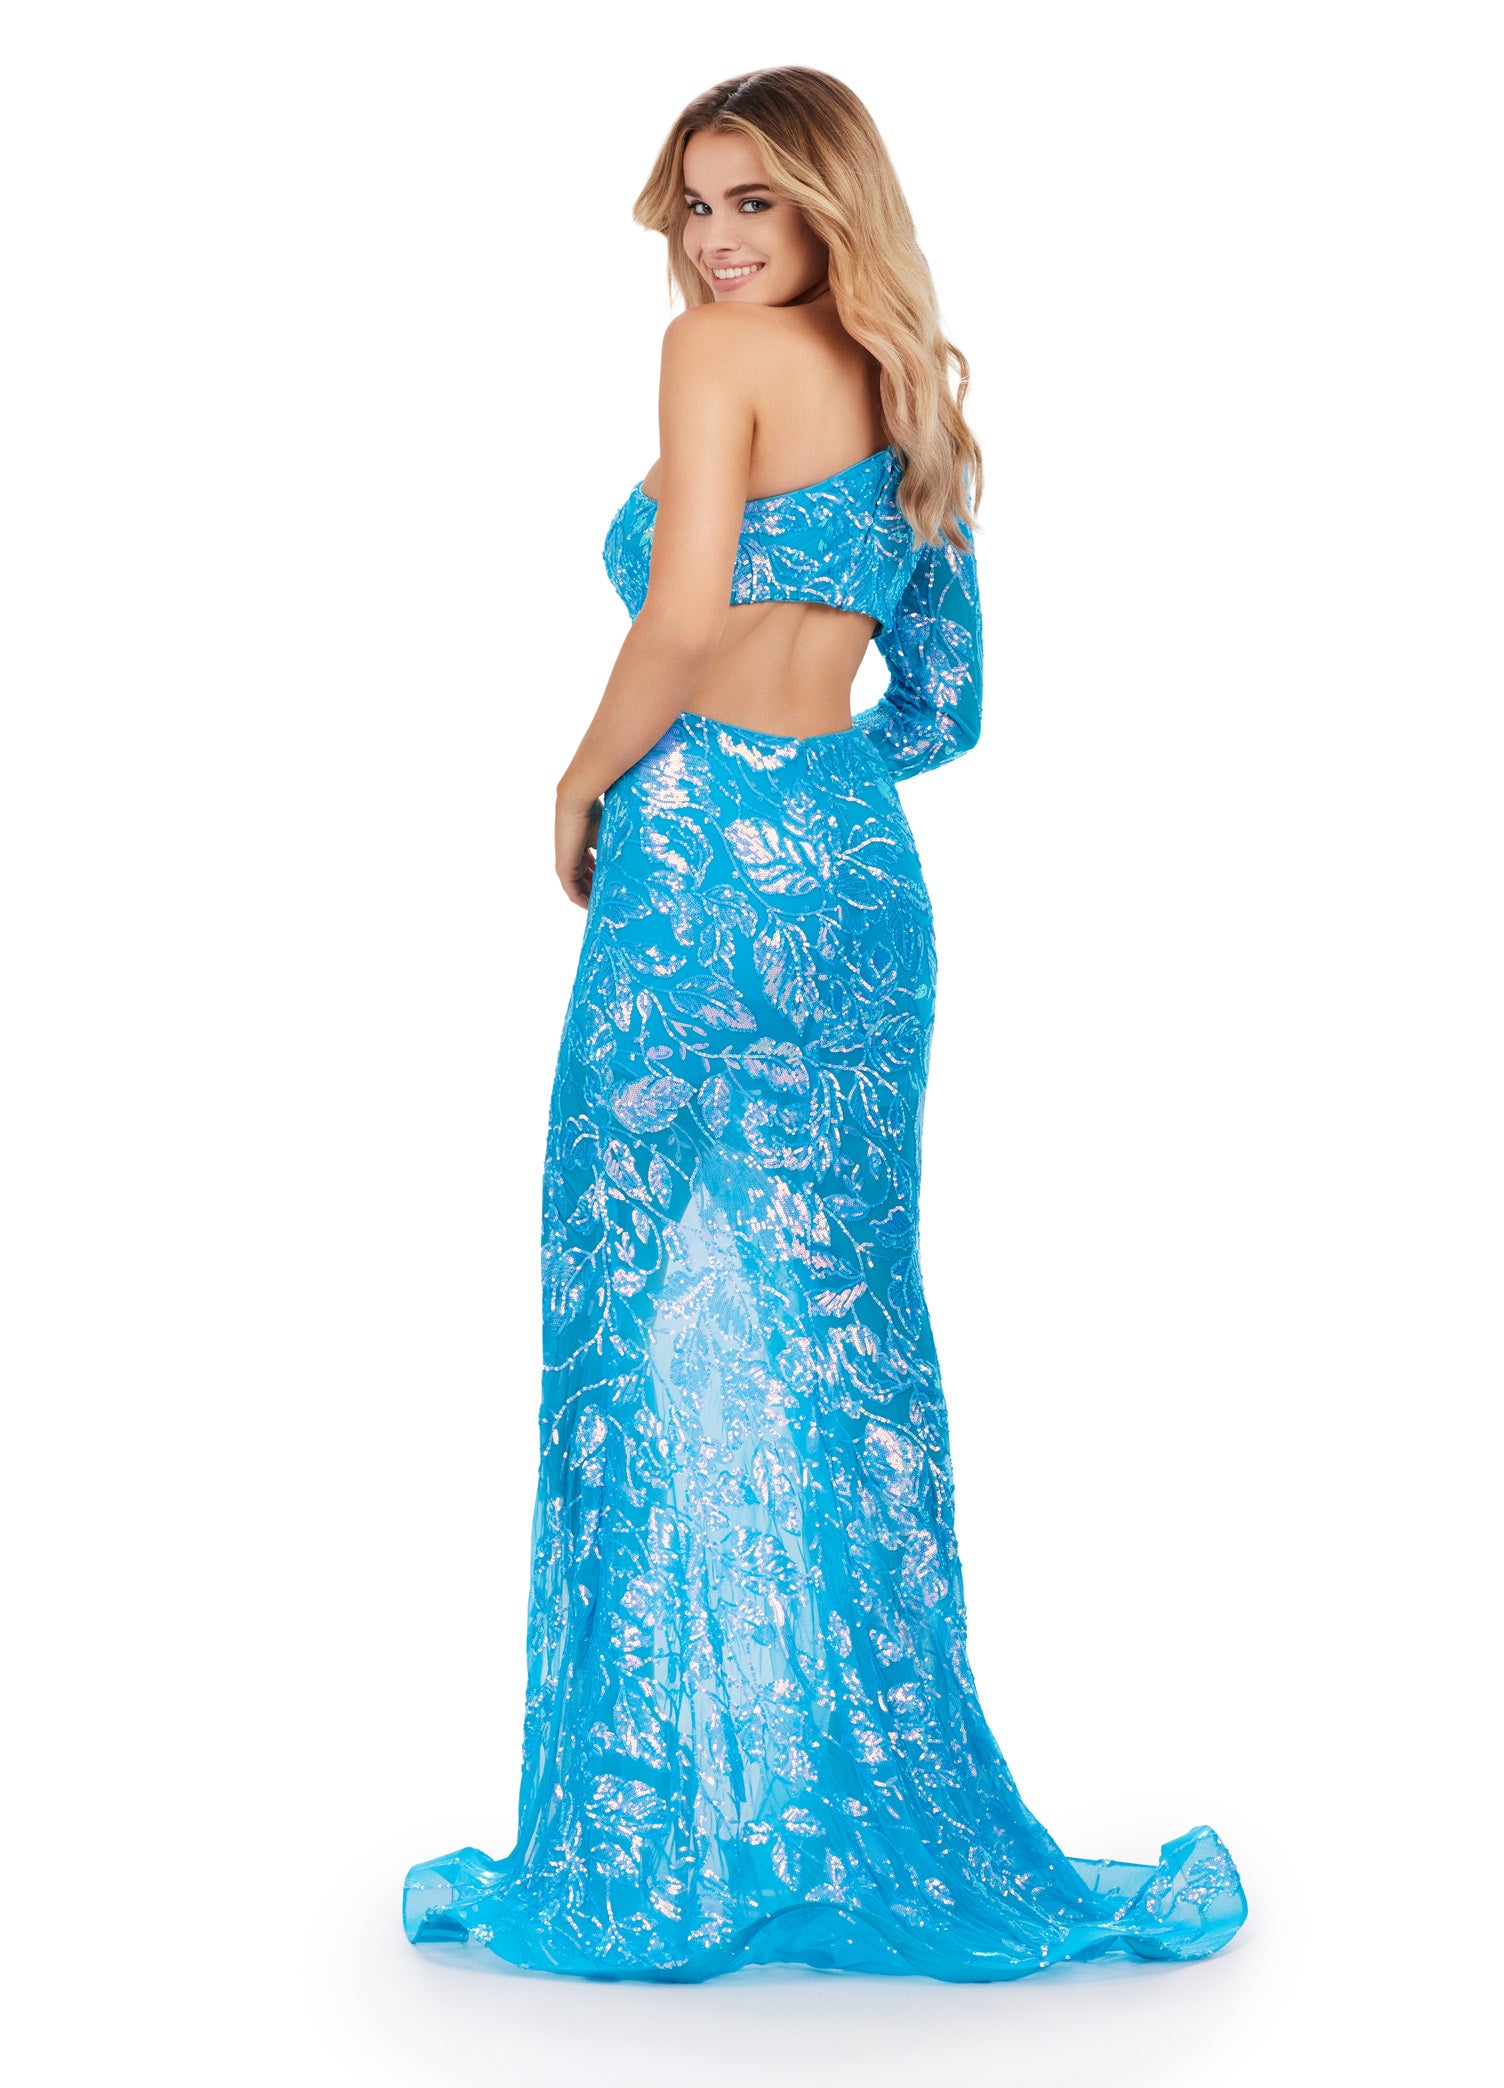 The Ashley Lauren 11442 Prom Dress is an elegant and stylish option for your next formal event. This dress features long sleeves and a one shoulder design, adorned with sparkling sequins for a touch of glamour. The sheer slit and cut out back add a modern twist, making this dress a standout choice. Shine bright in this fully sequin one shoulder gown! Perfect for any occasion, this elegant gown features a left leg slit and cut out back!